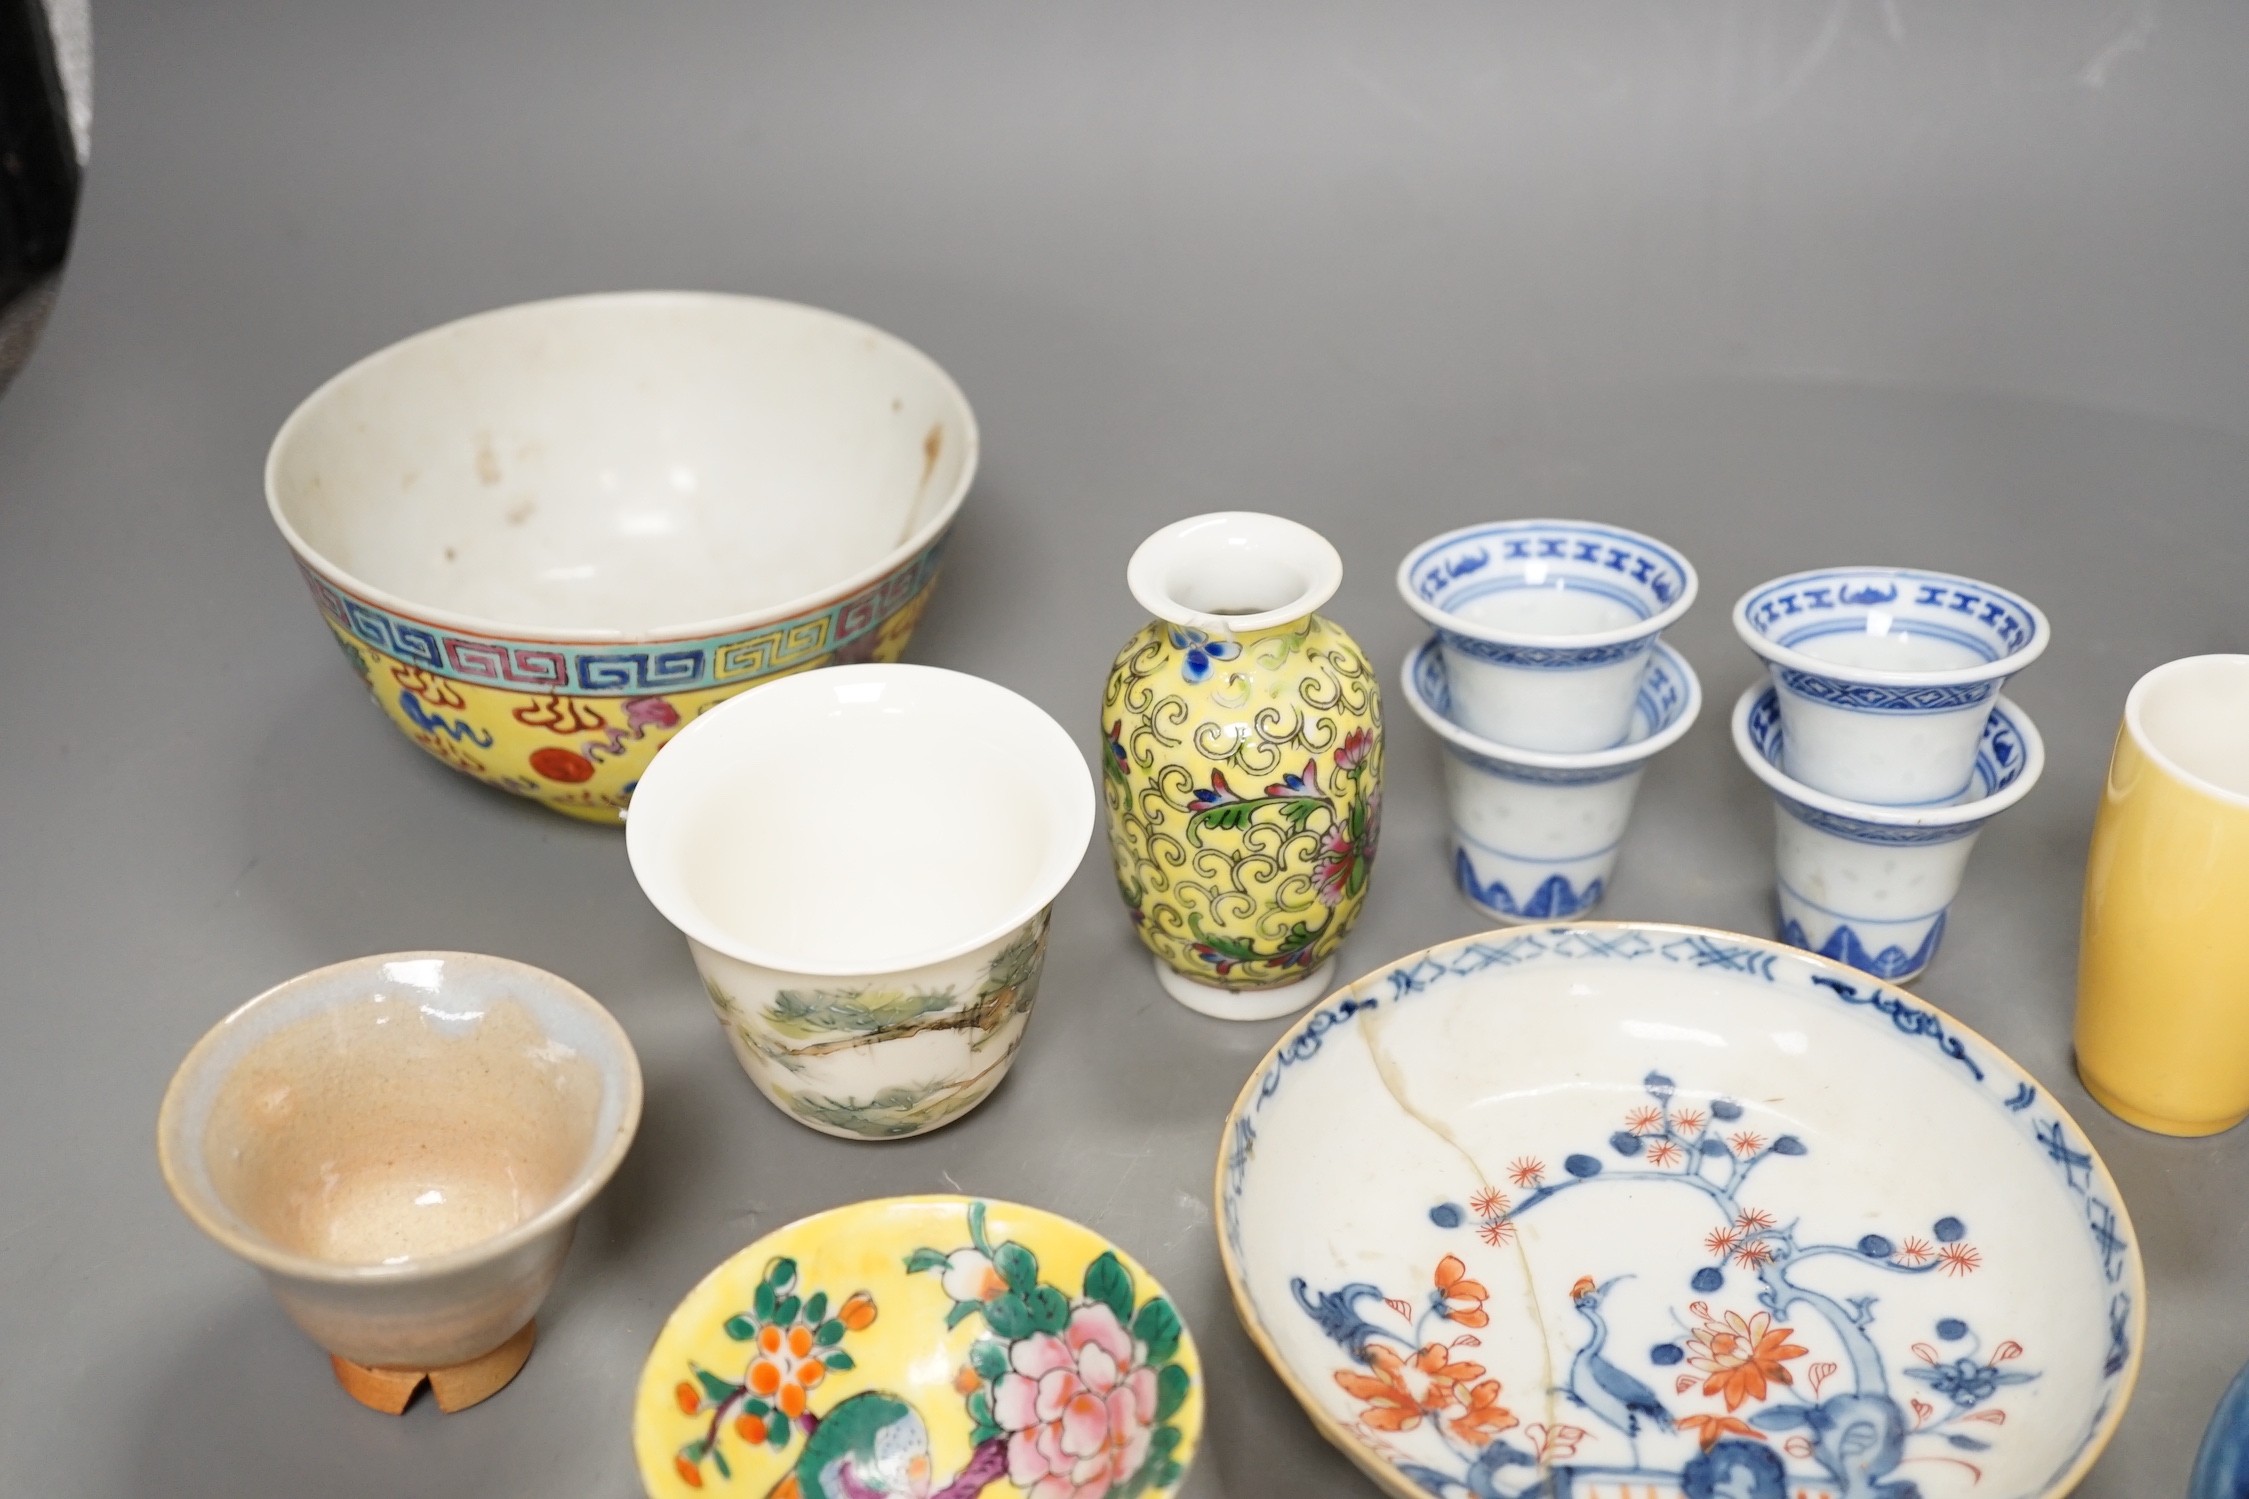 Assorted Chinese ceramics and a wooden box